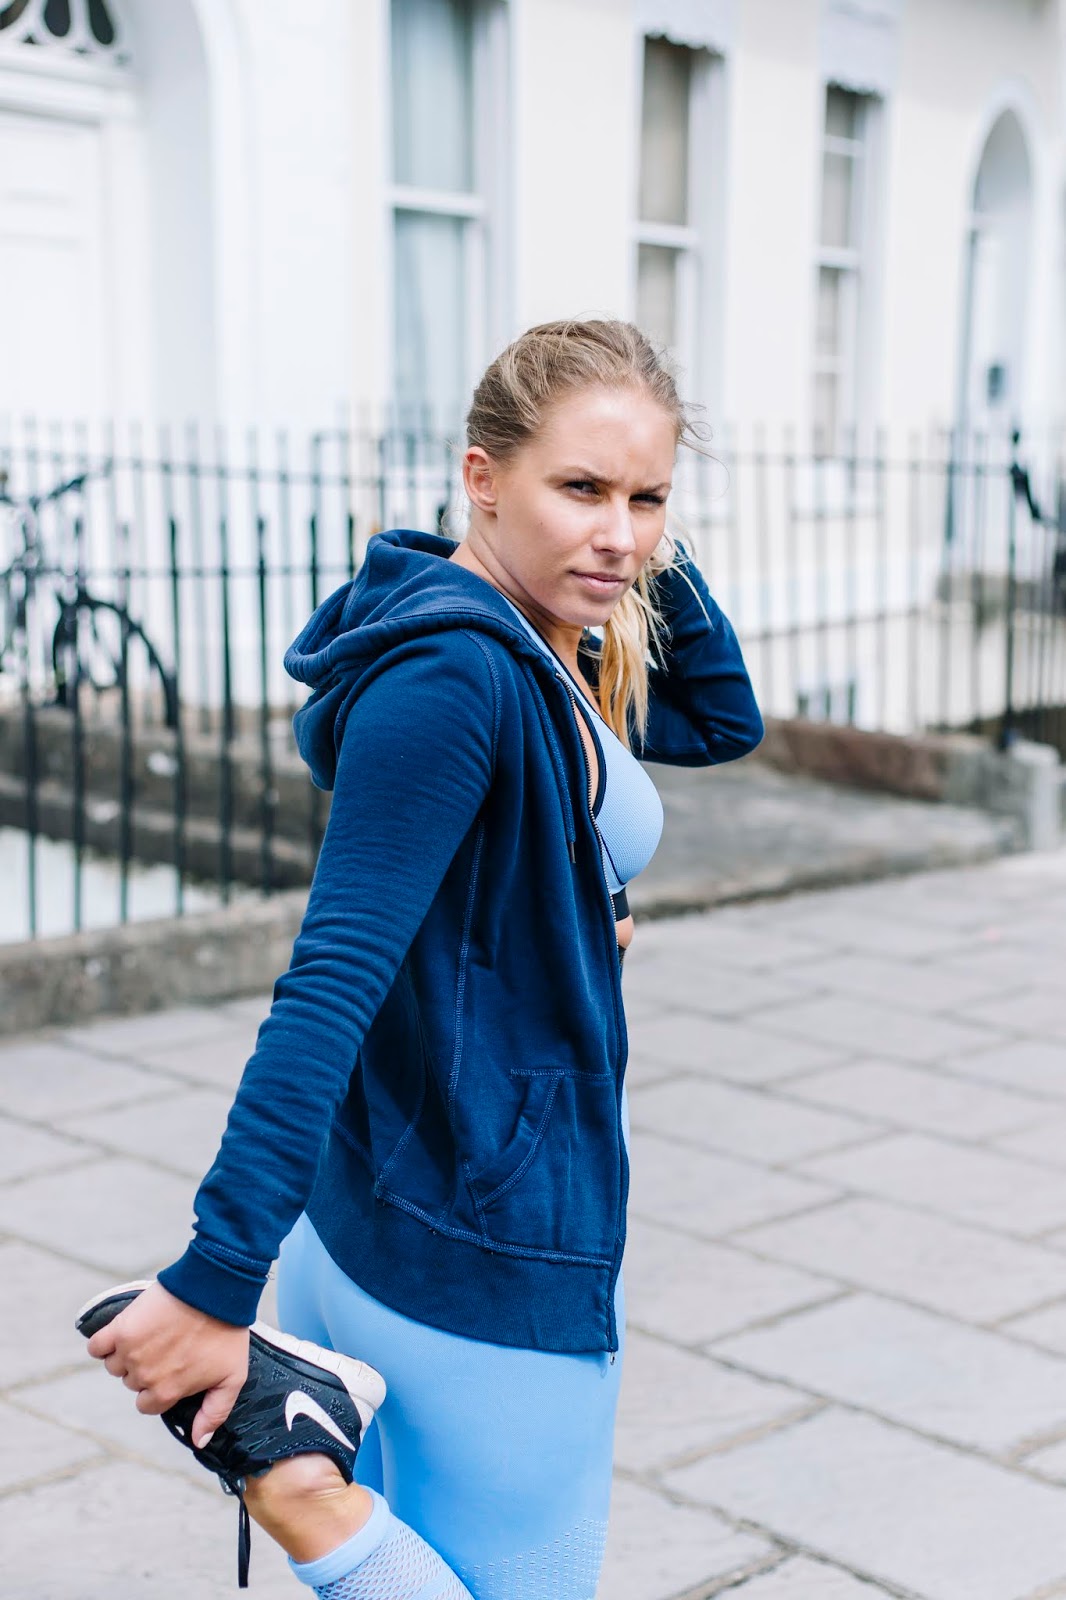 Fitness | Getting a Personal Trainer - Rachel Emily Blog